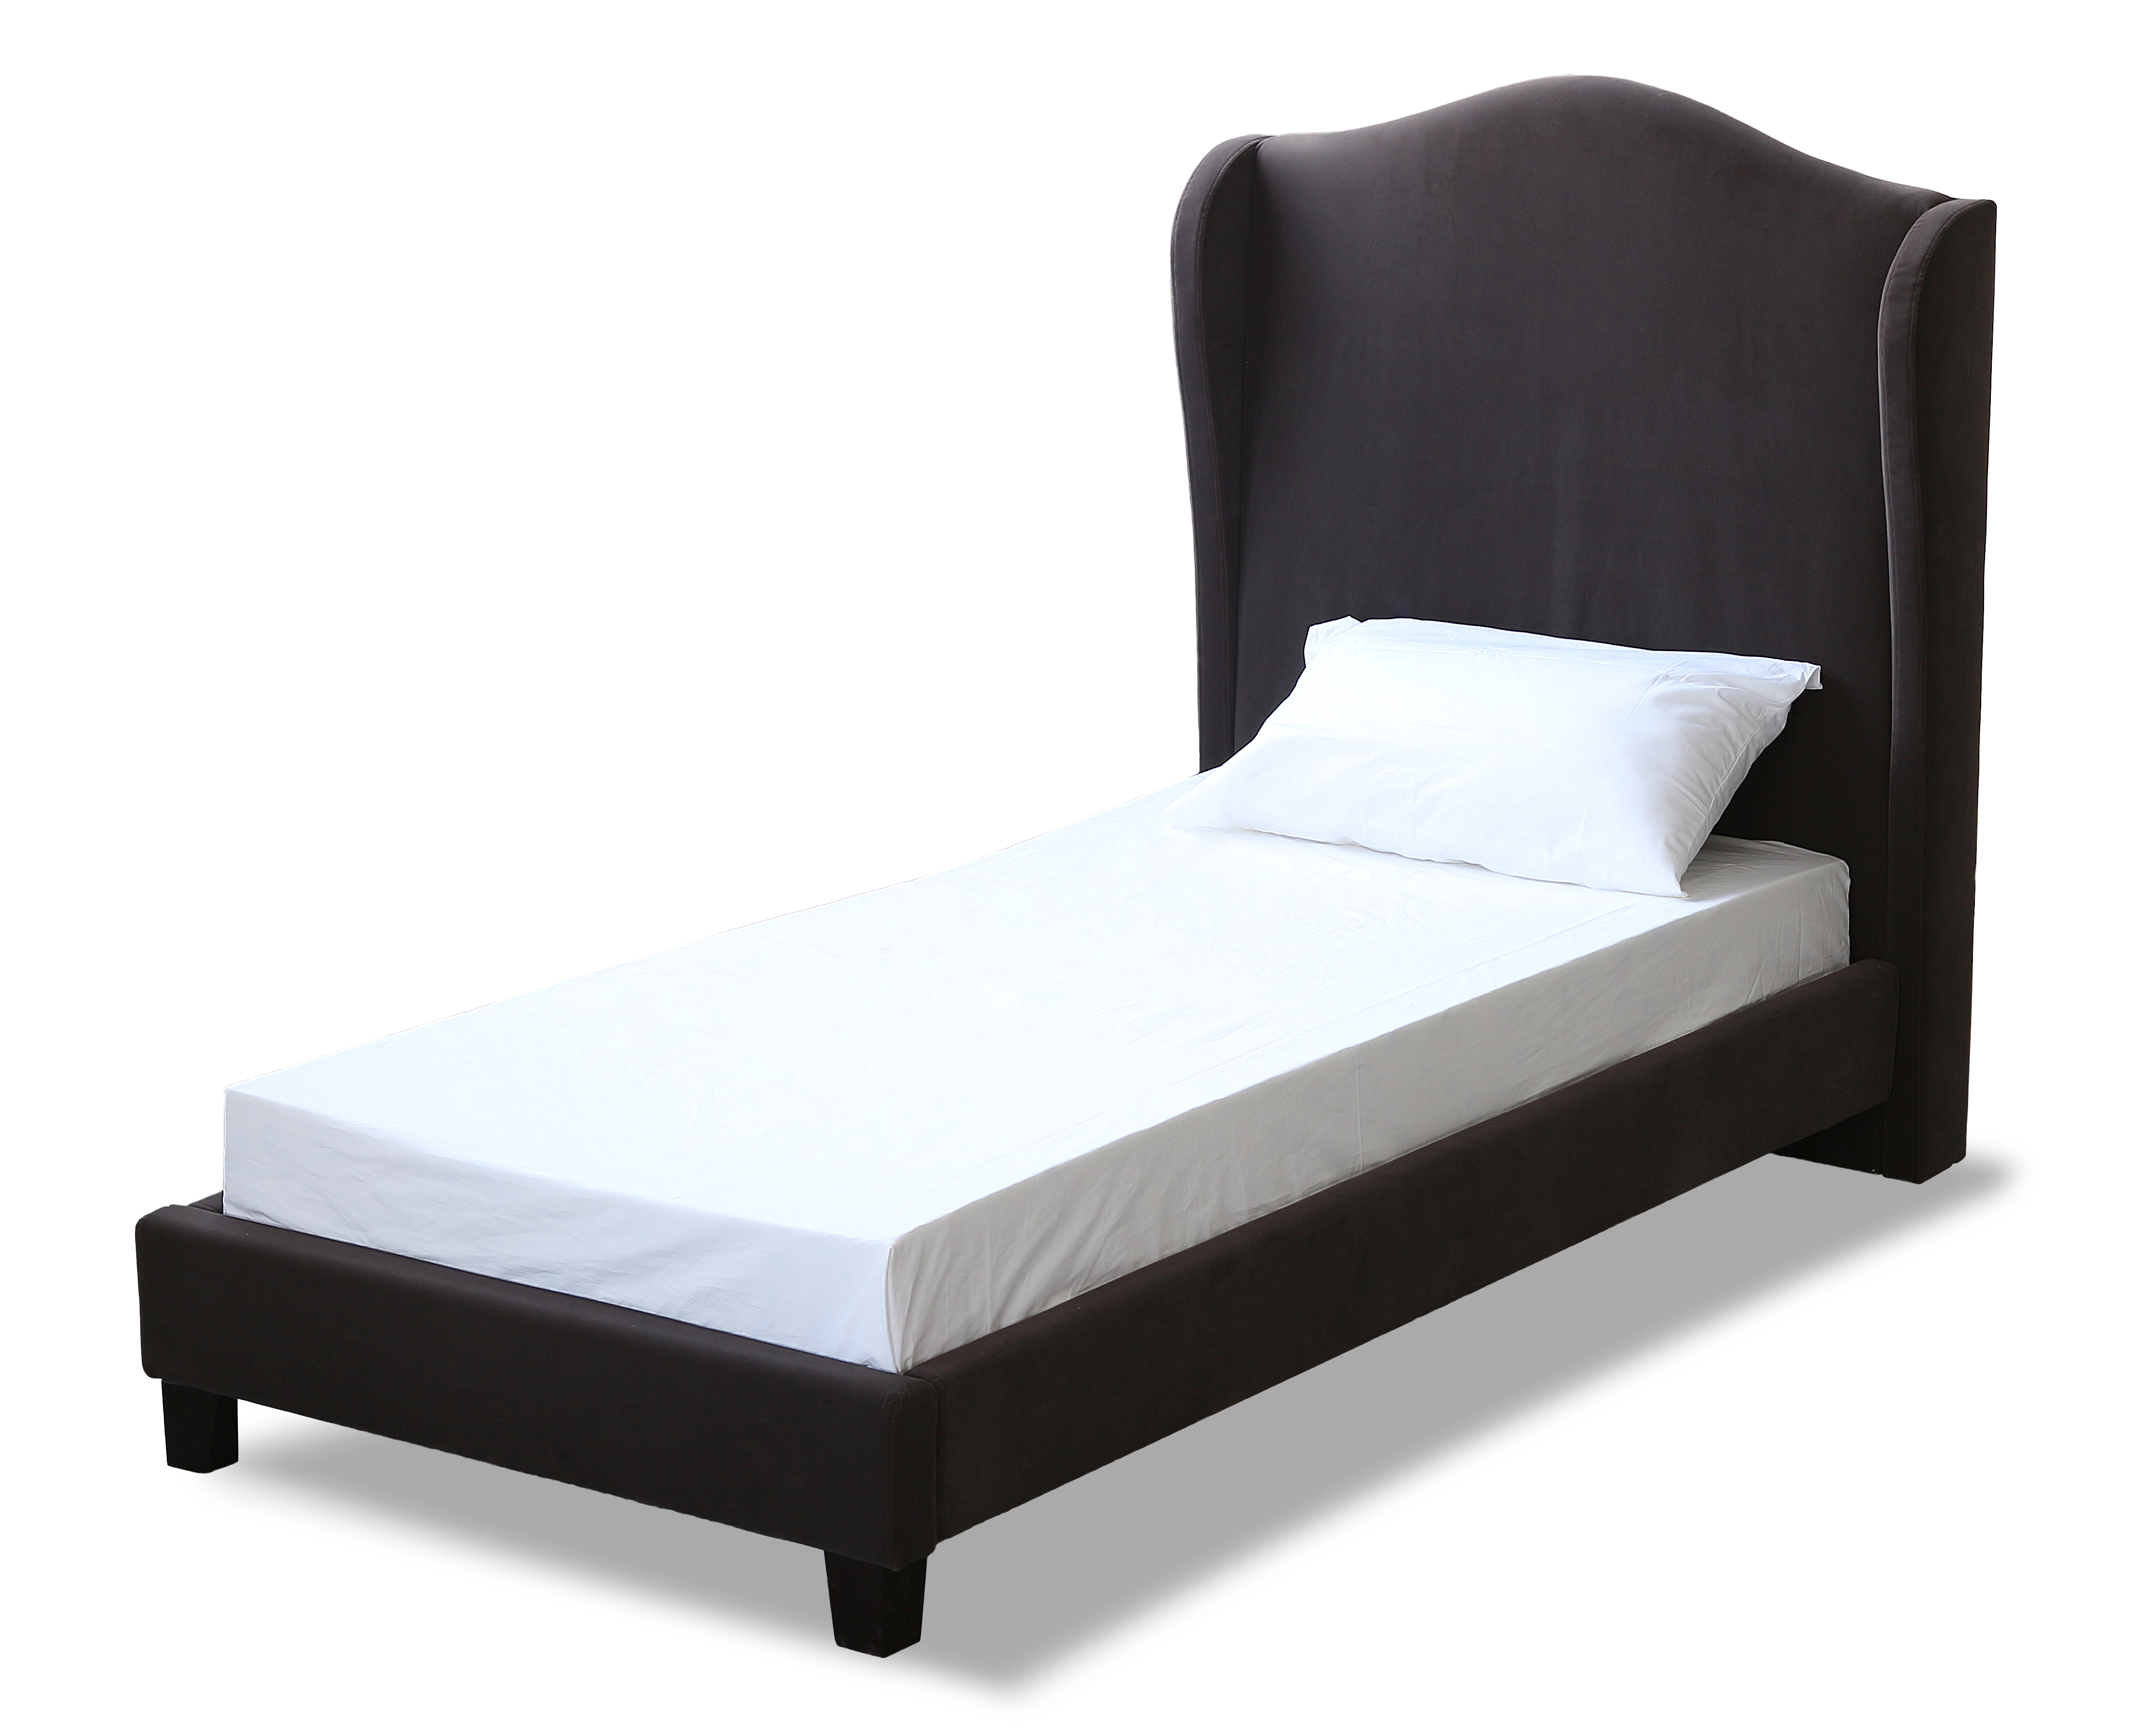 Chateaux 3.0 Single Bed Charcoal